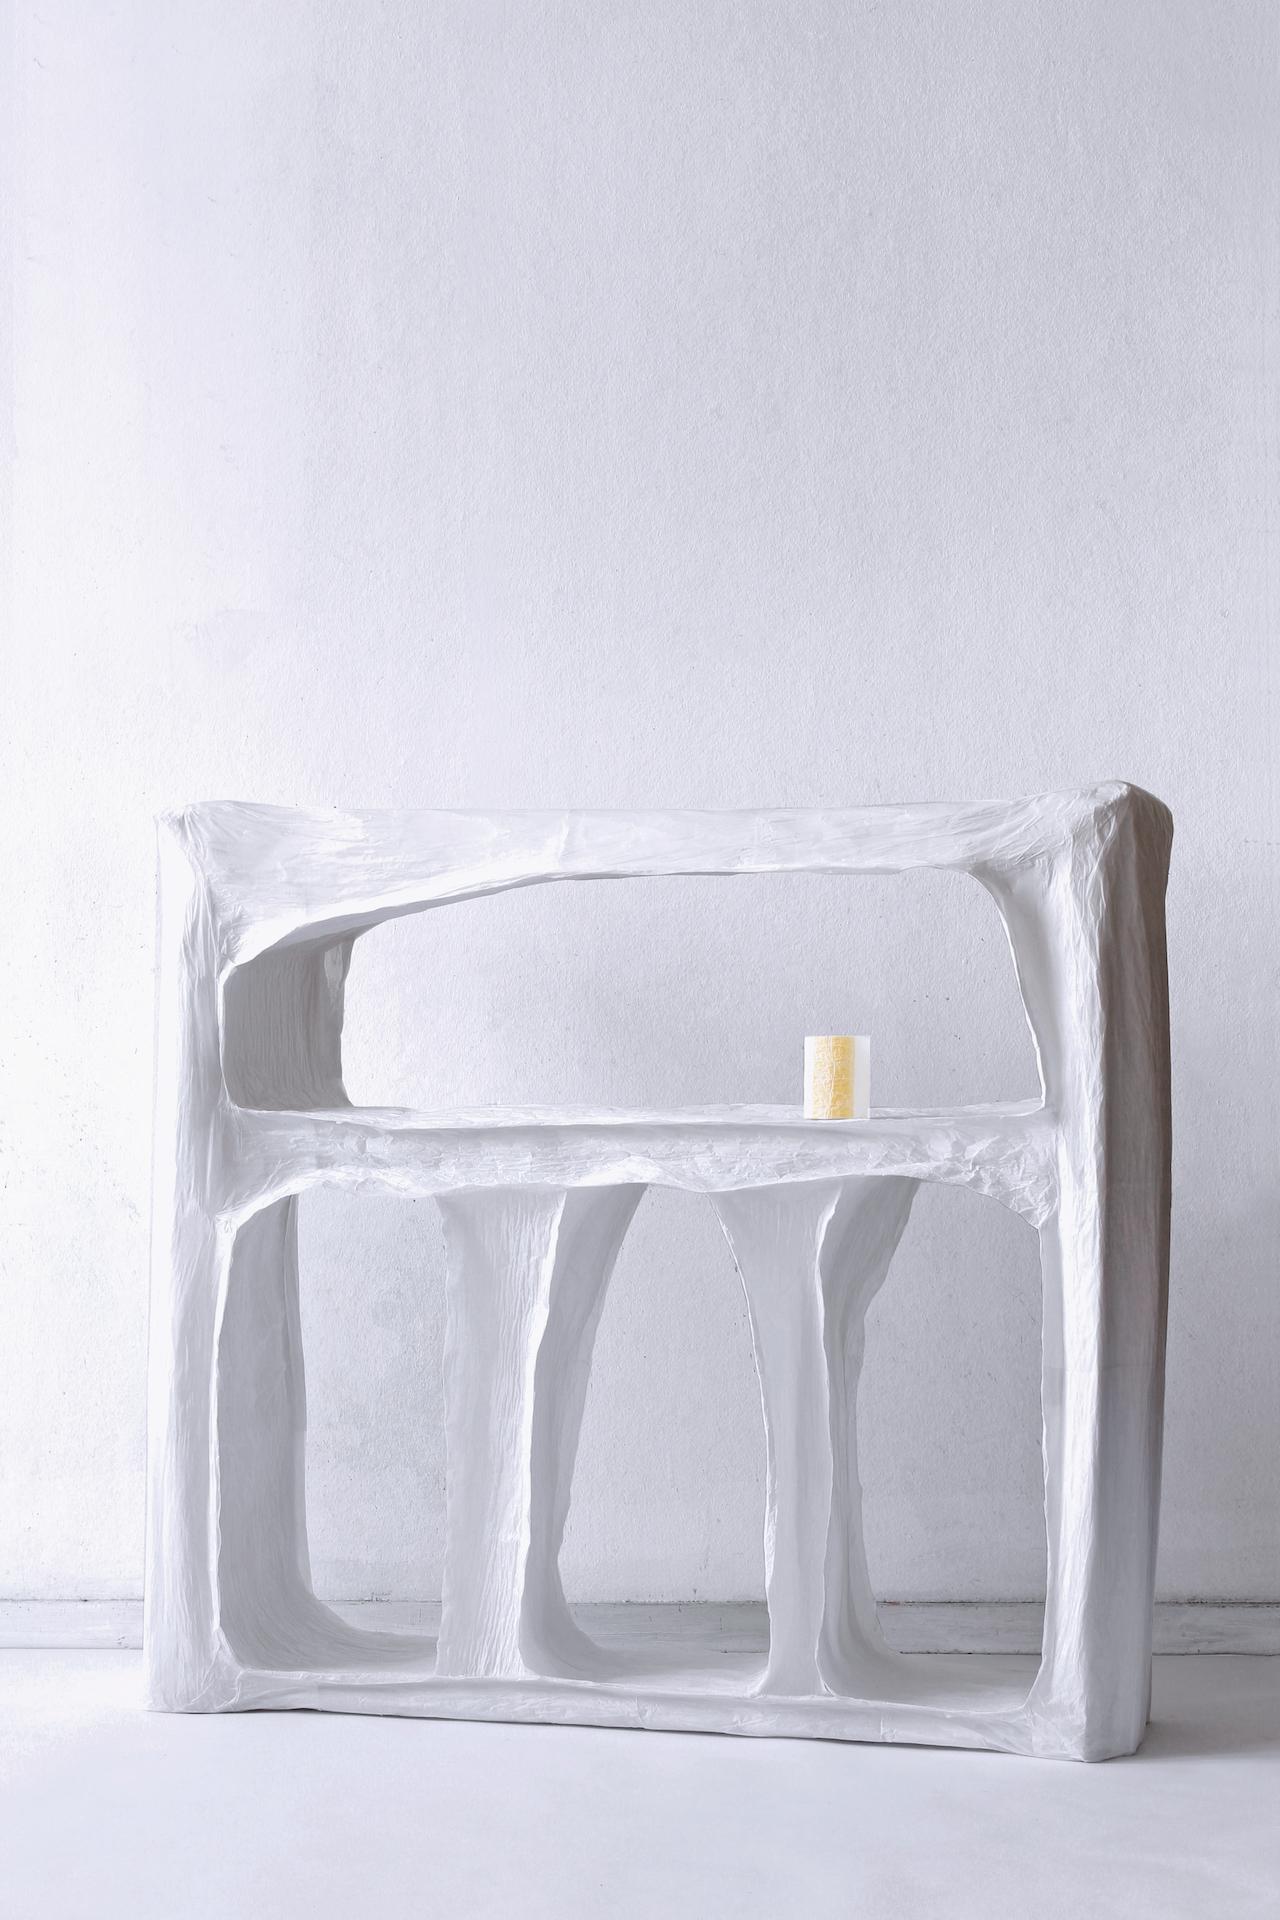 Taiwanese Designer Pao Hui Kao on Turning Raw Materials into Gallery-Worthy Furniture Pieces